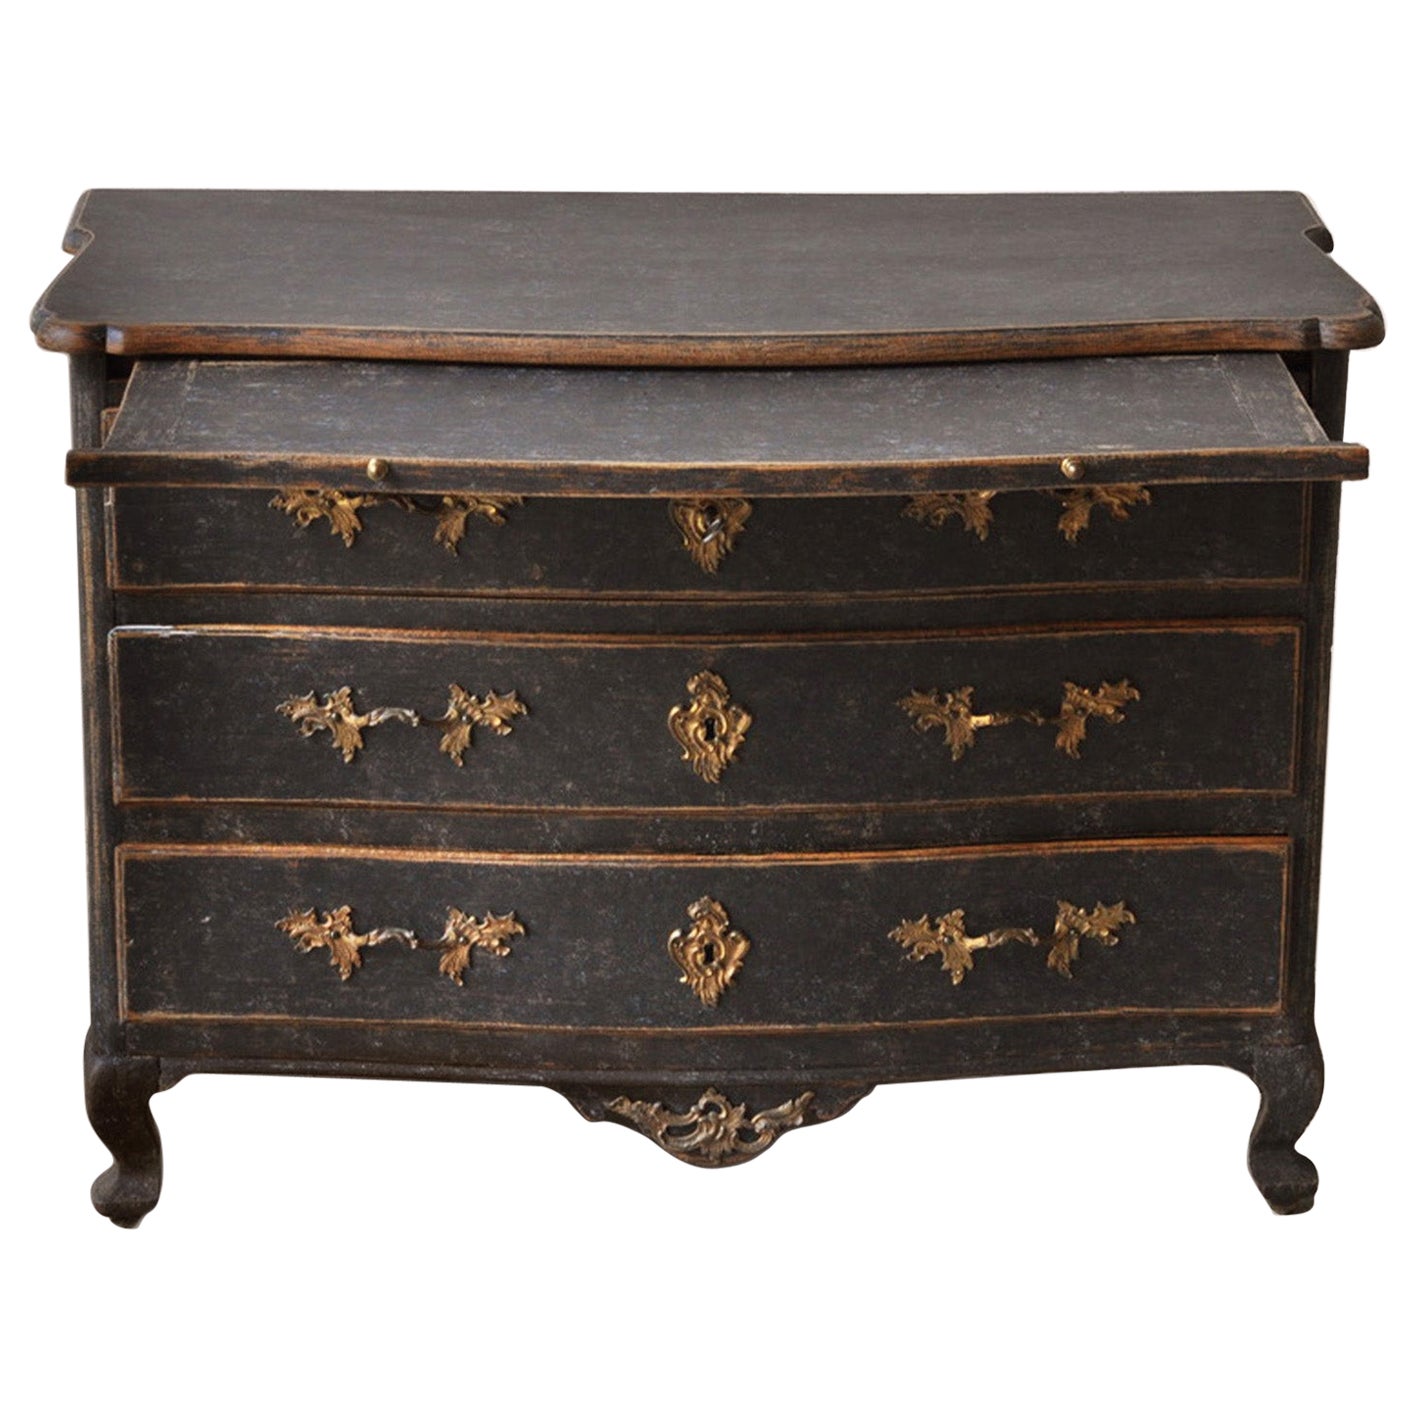 18th C. Swedish Rococo Period Black Painted Commode with Original Brass Hardware For Sale